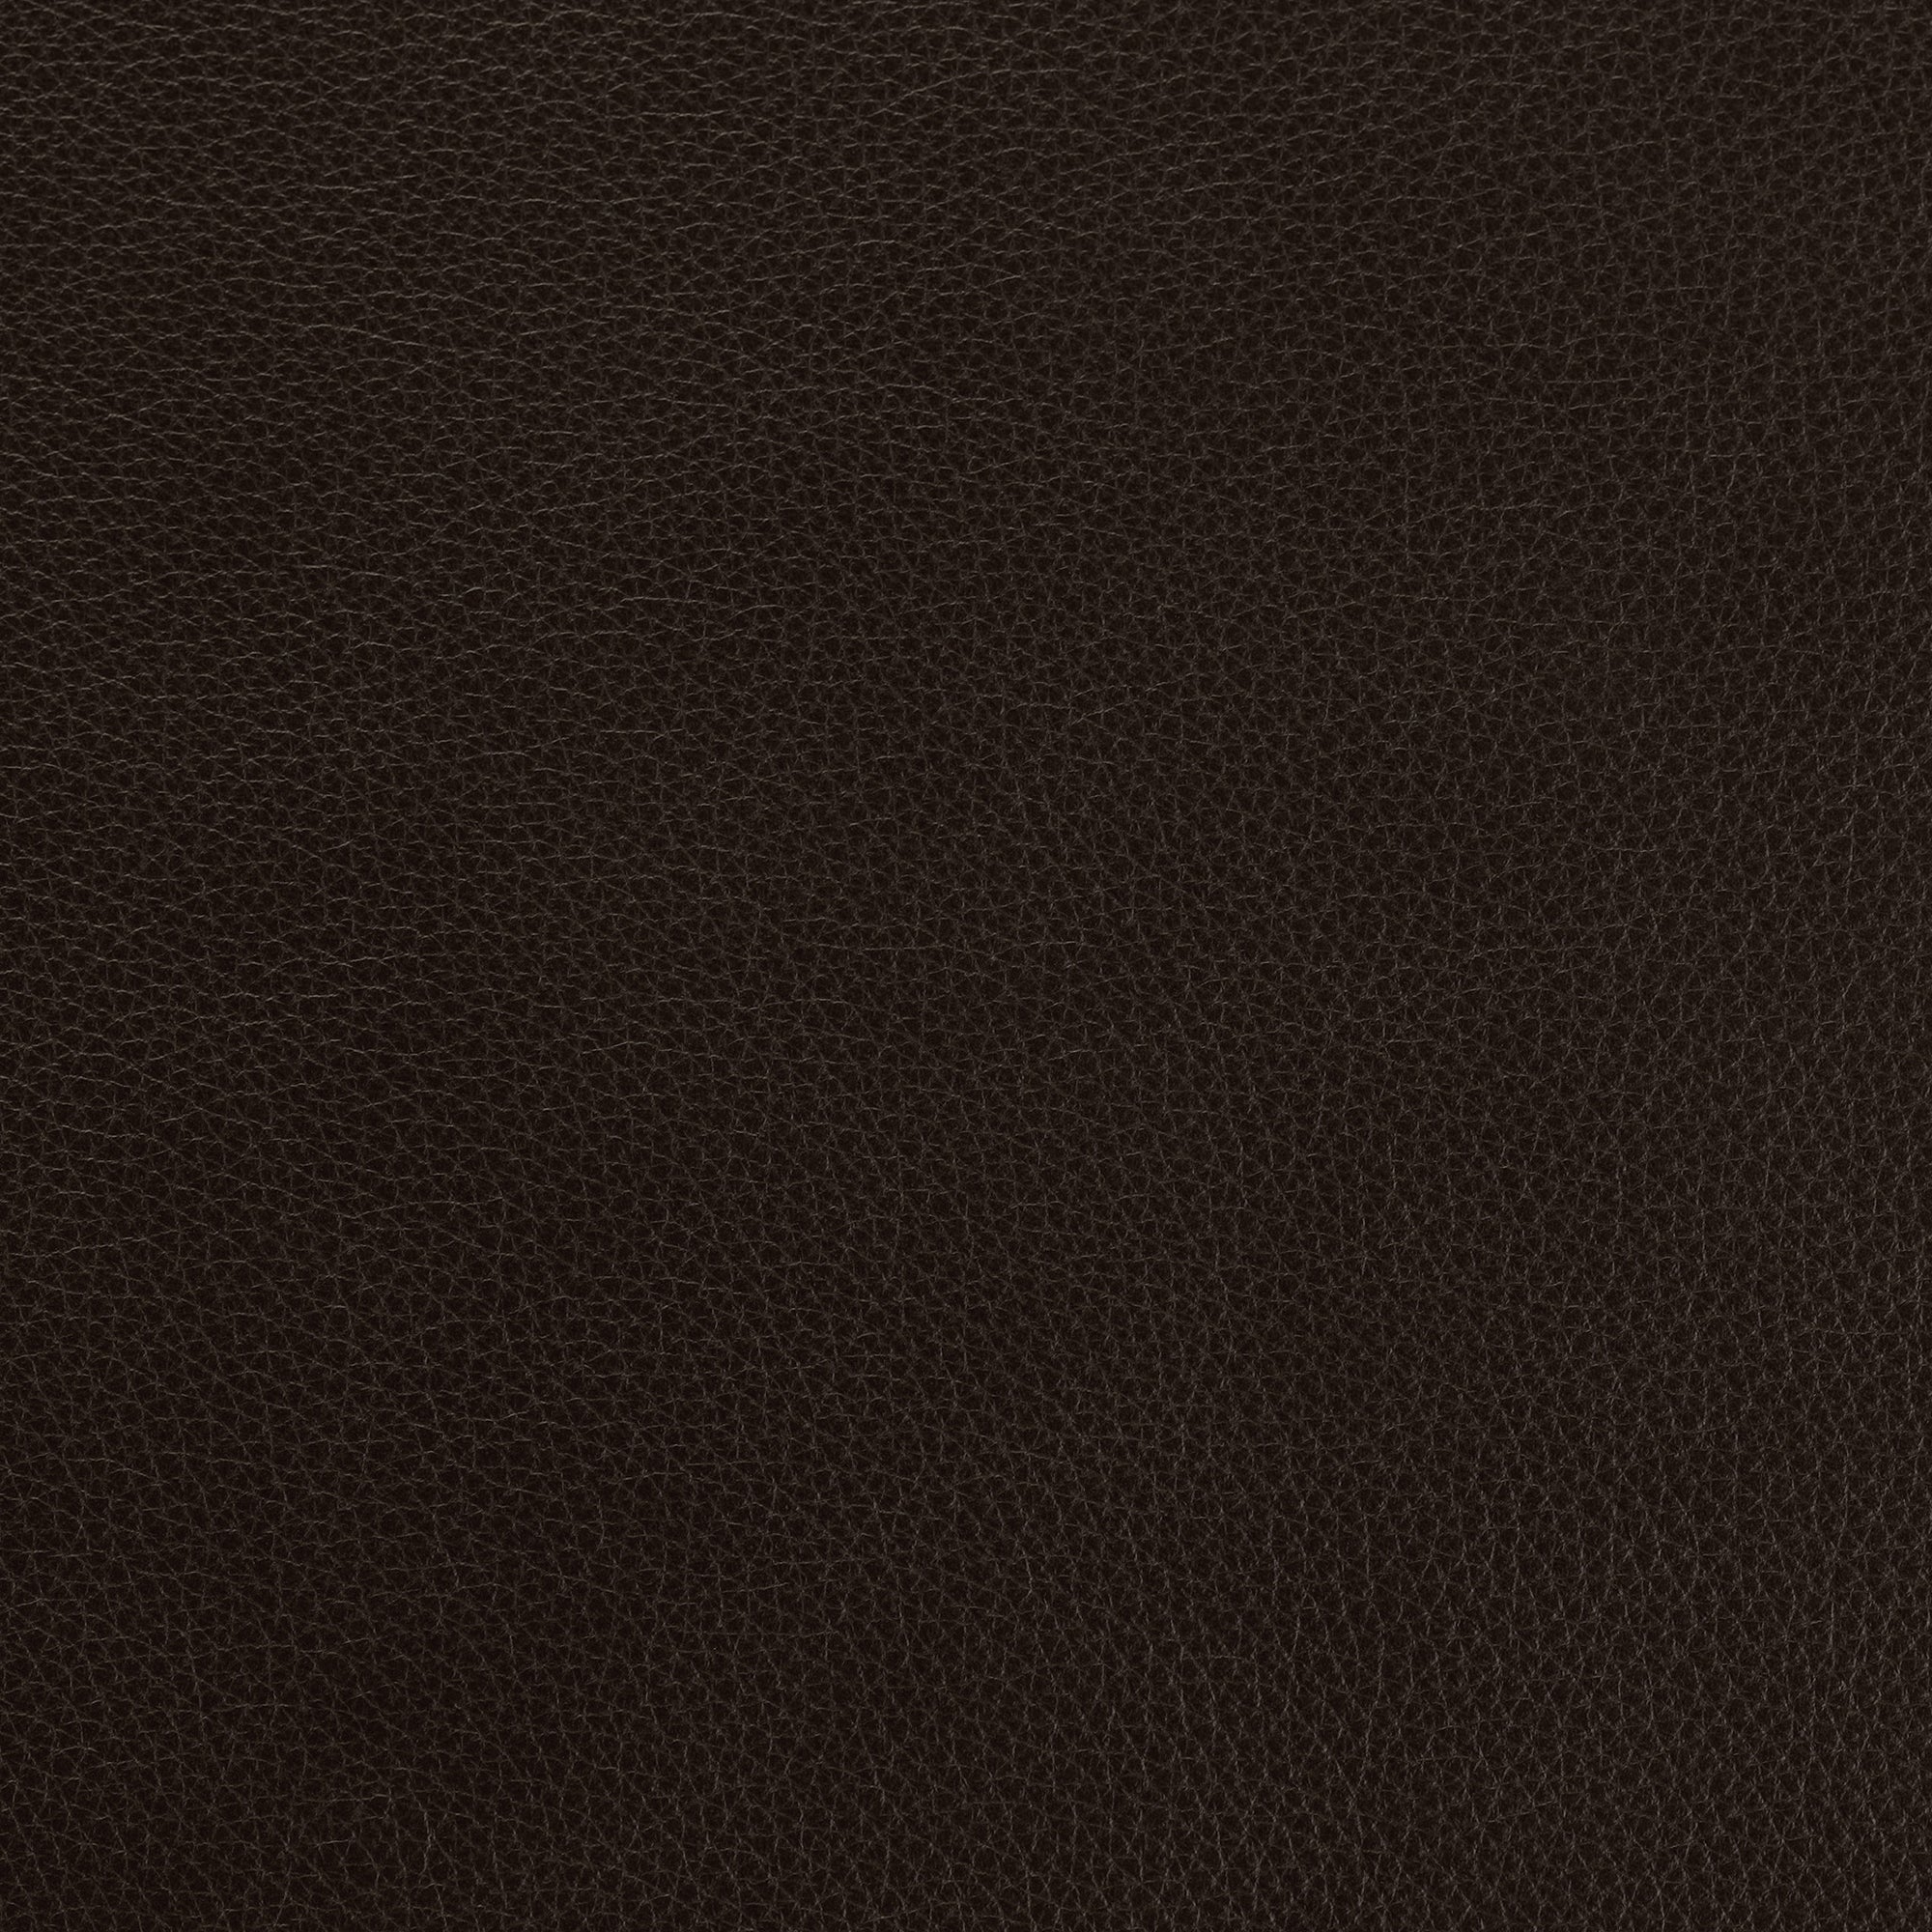 Chocolate Pebbled Leather -  Swatch